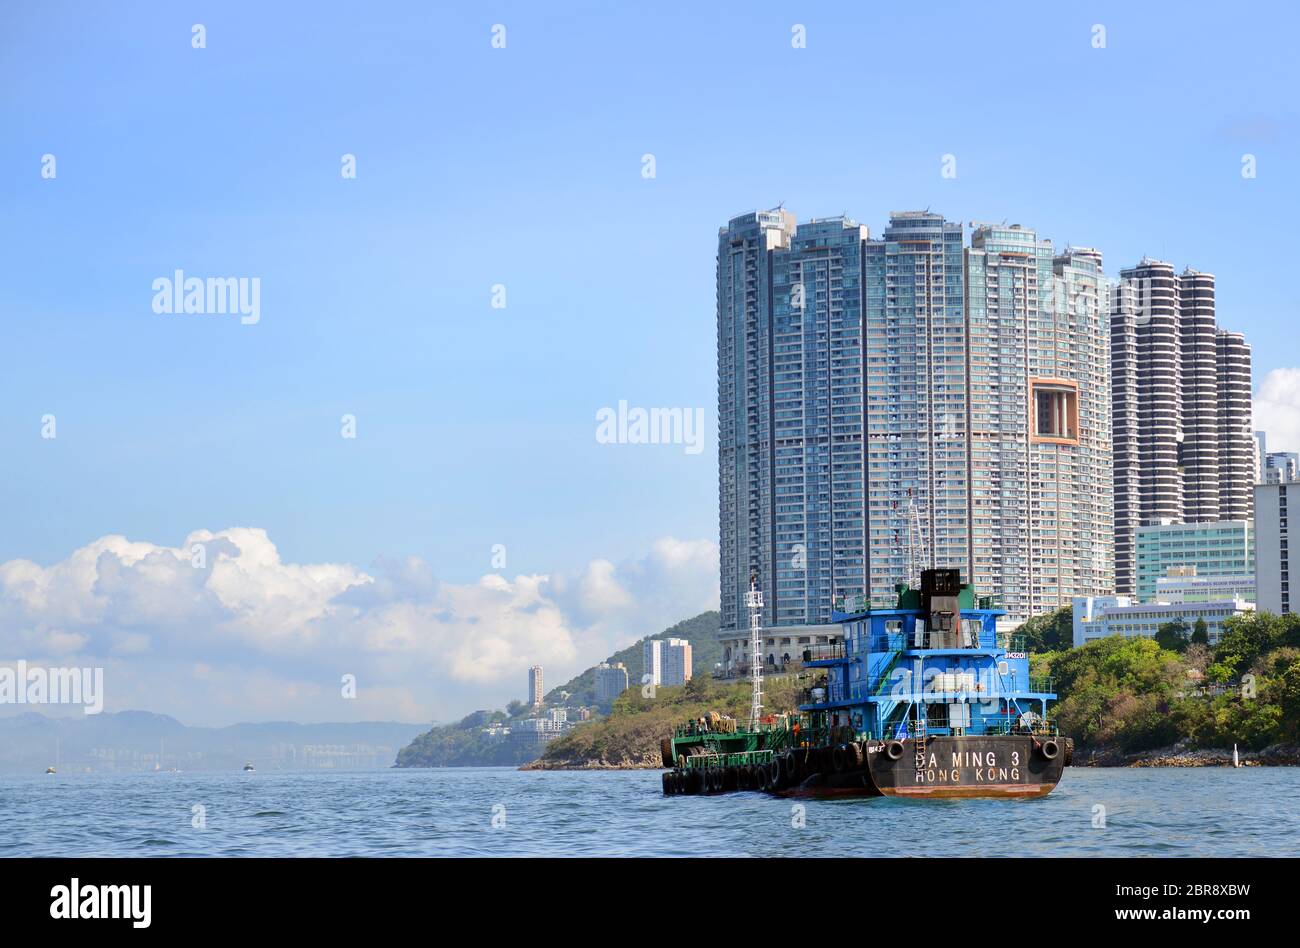 Residence Bell-air sul lato sud dell'isola di Hong Kong. Foto Stock